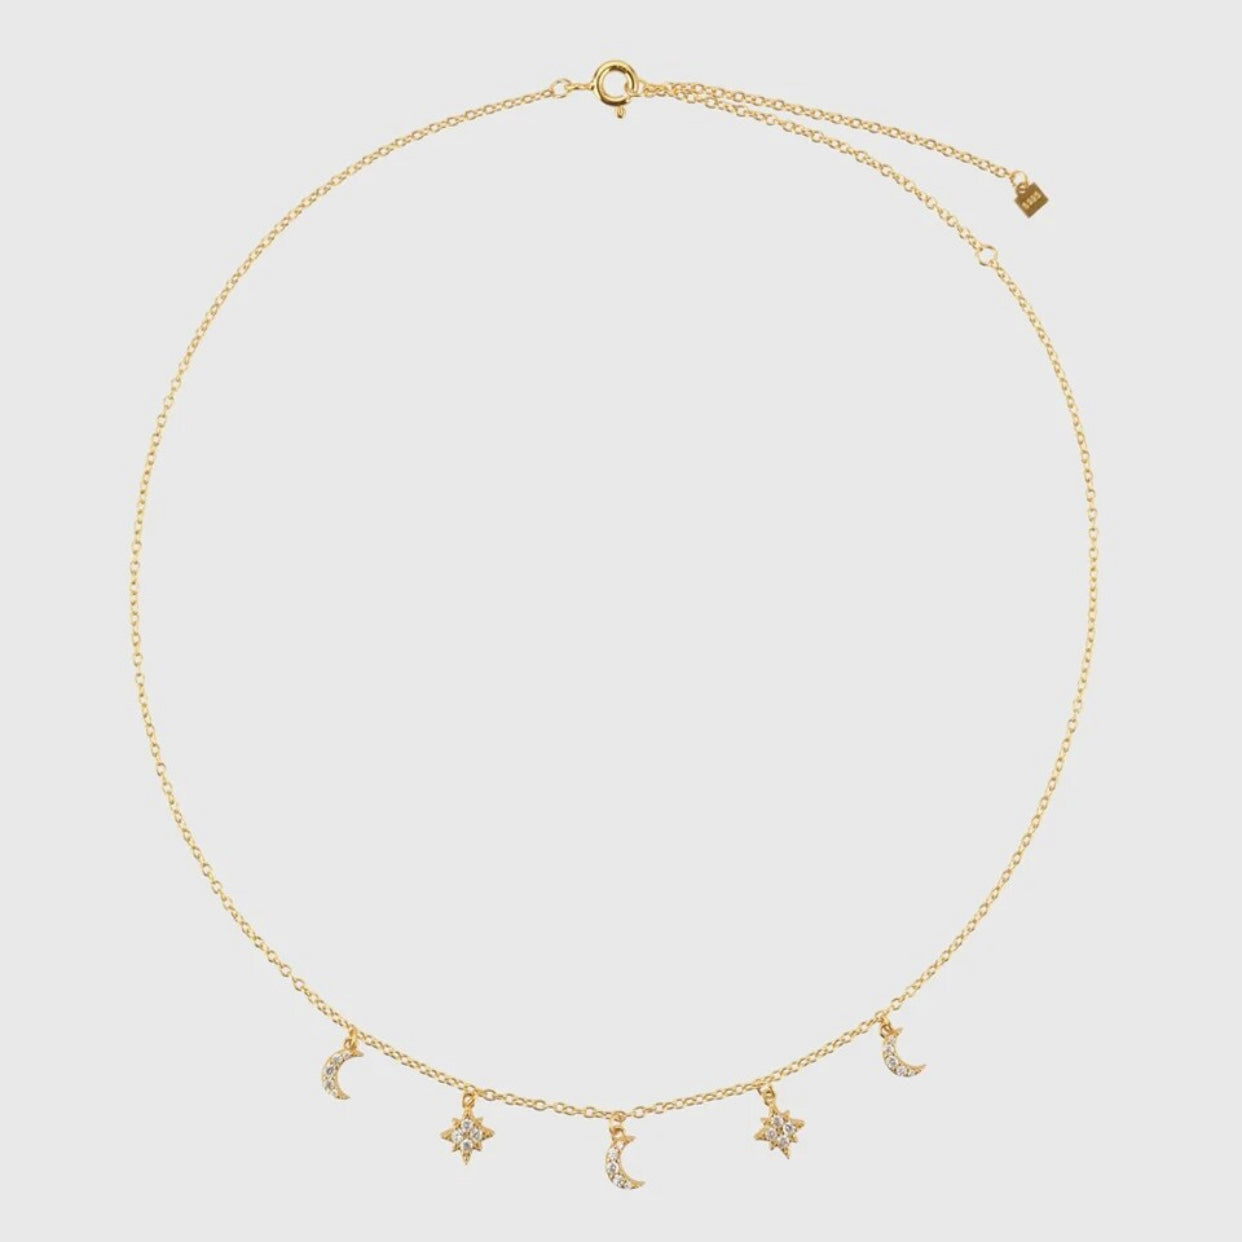 AMAEDA STERLING SILVER MOON AND STAR PAVE NECKLACE